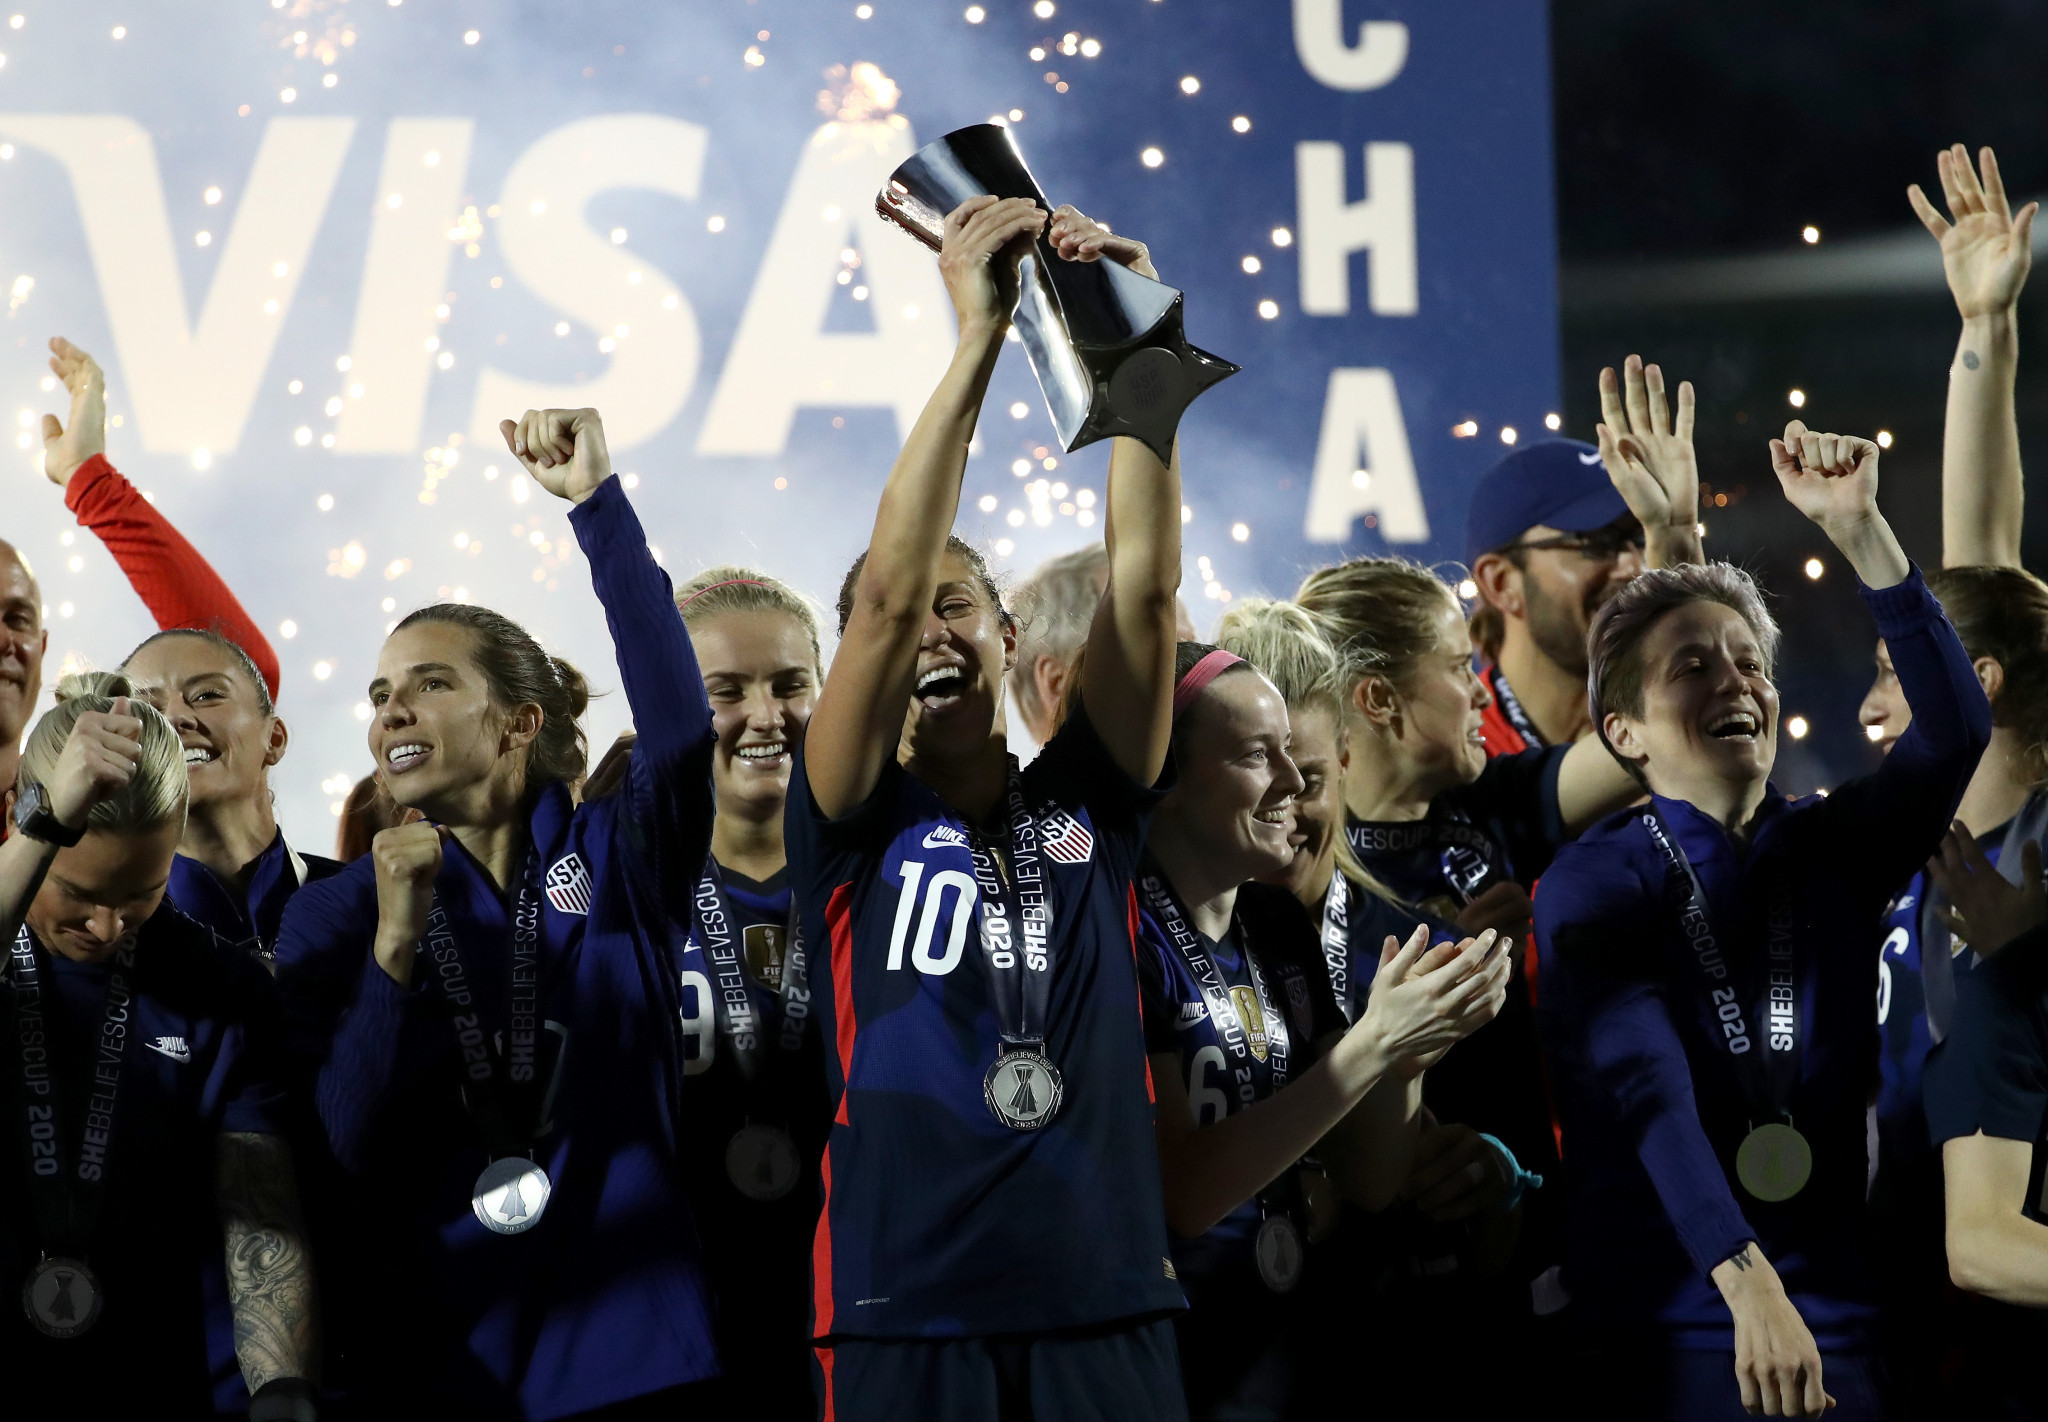 United States, Canada and Brazil to step up Olympic preparations at SheBelieves Cup